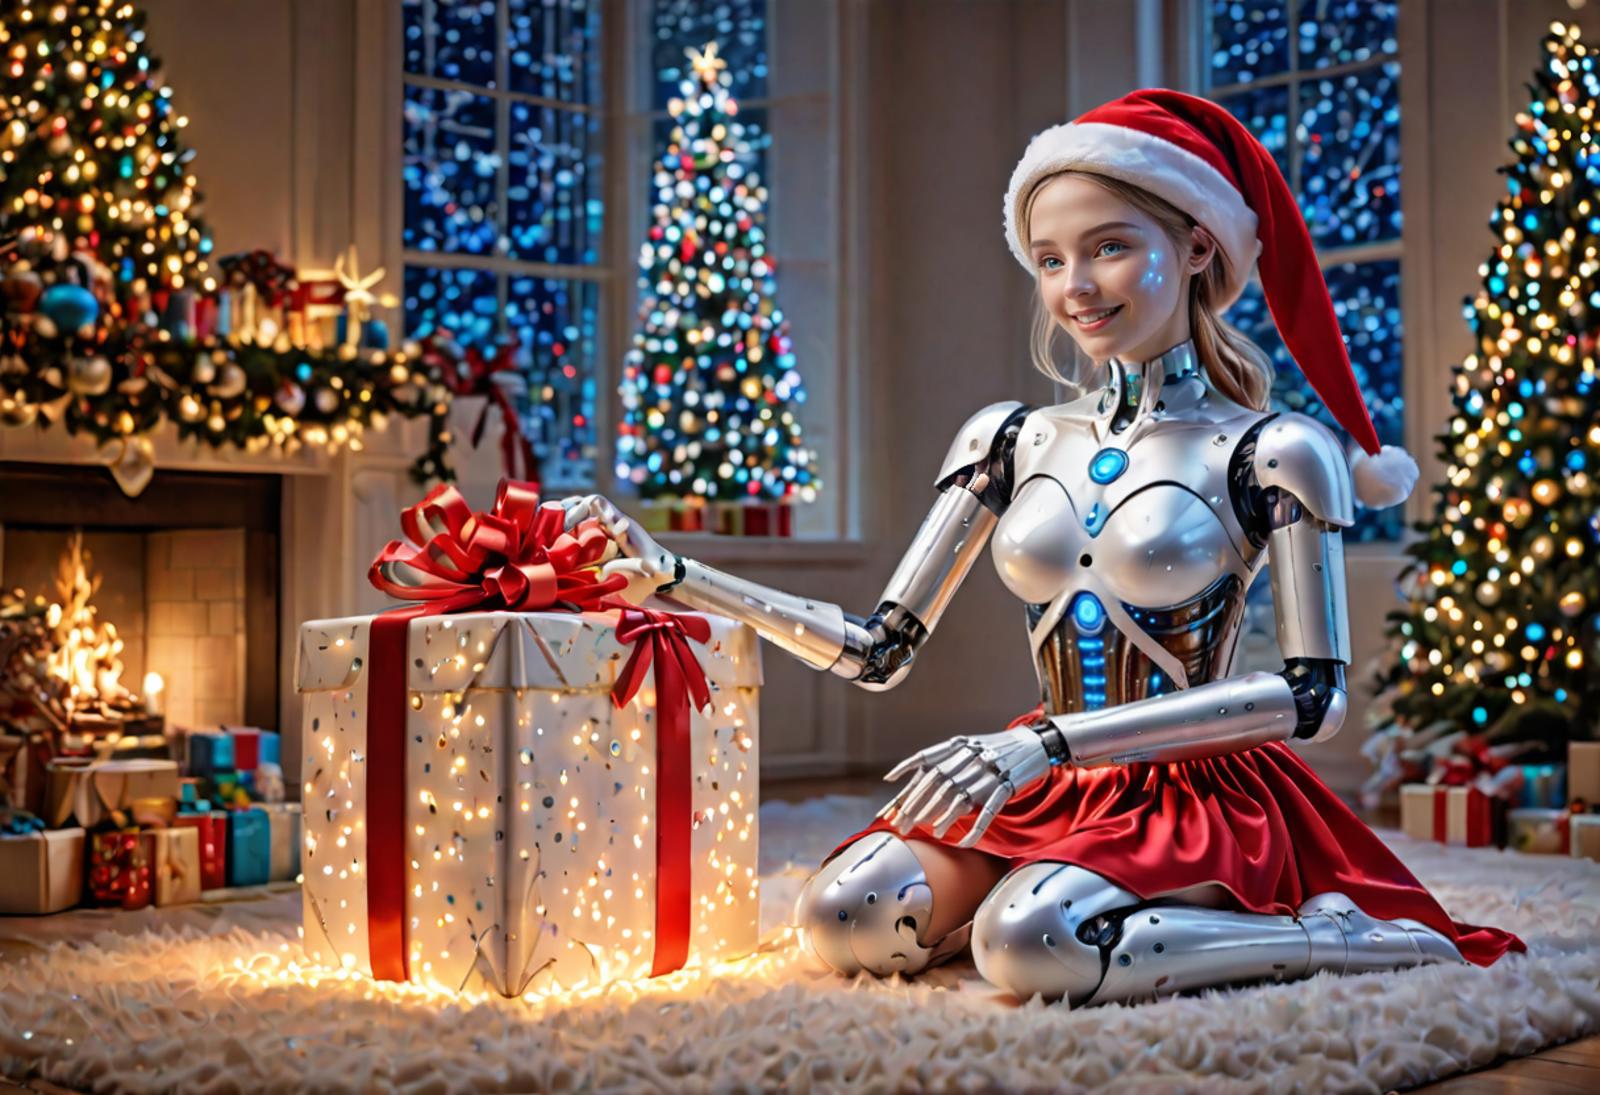 A Robot in a Santa Hat and Skirt Opening a Gift